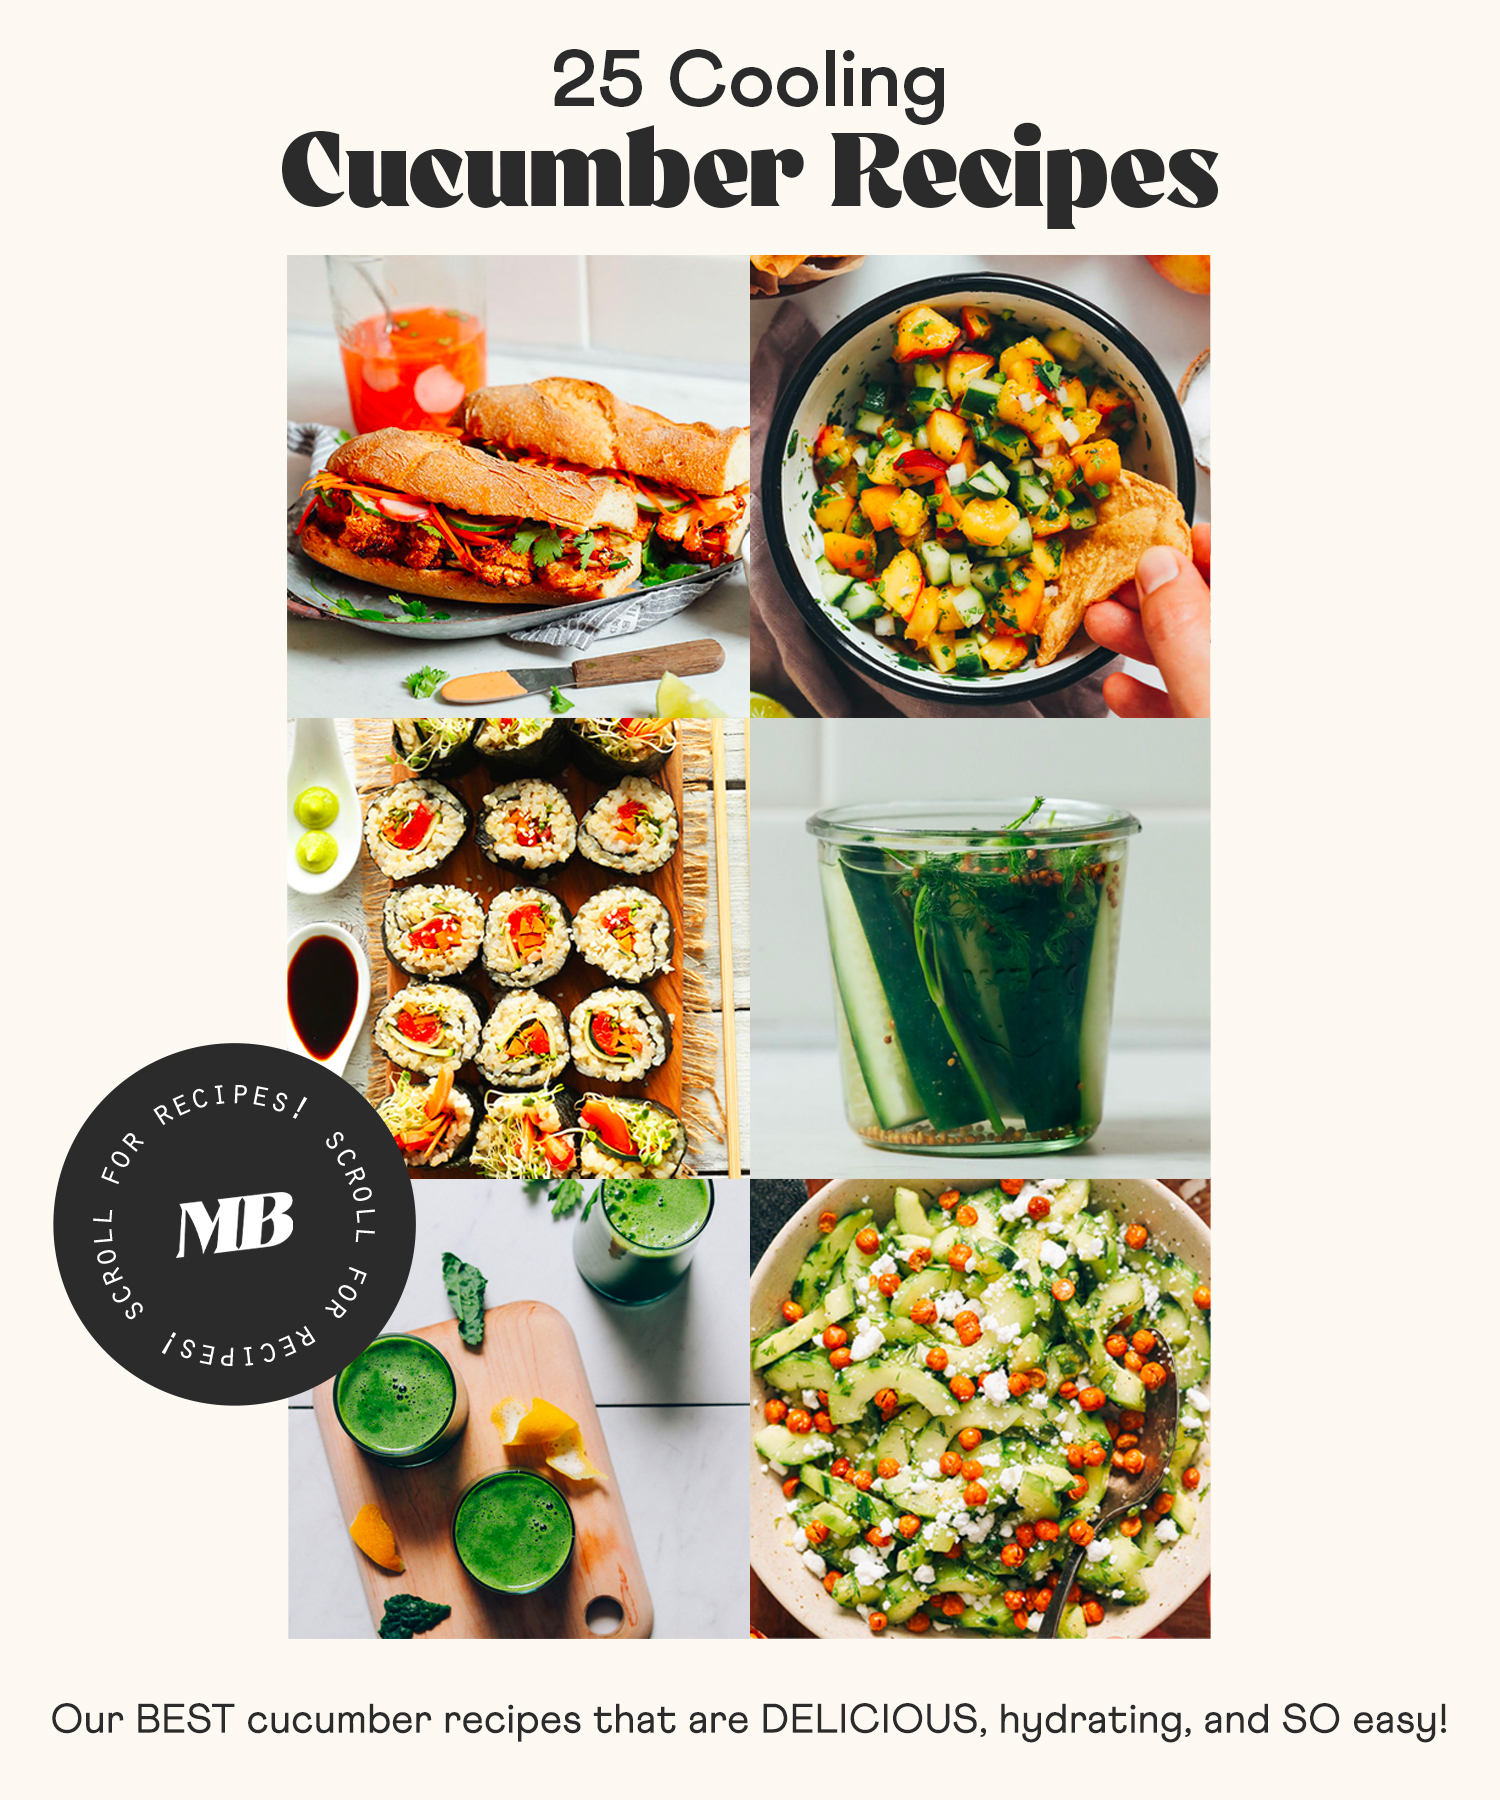 Photos of cooling cucumber recipes including drinks, dips, salads, and more